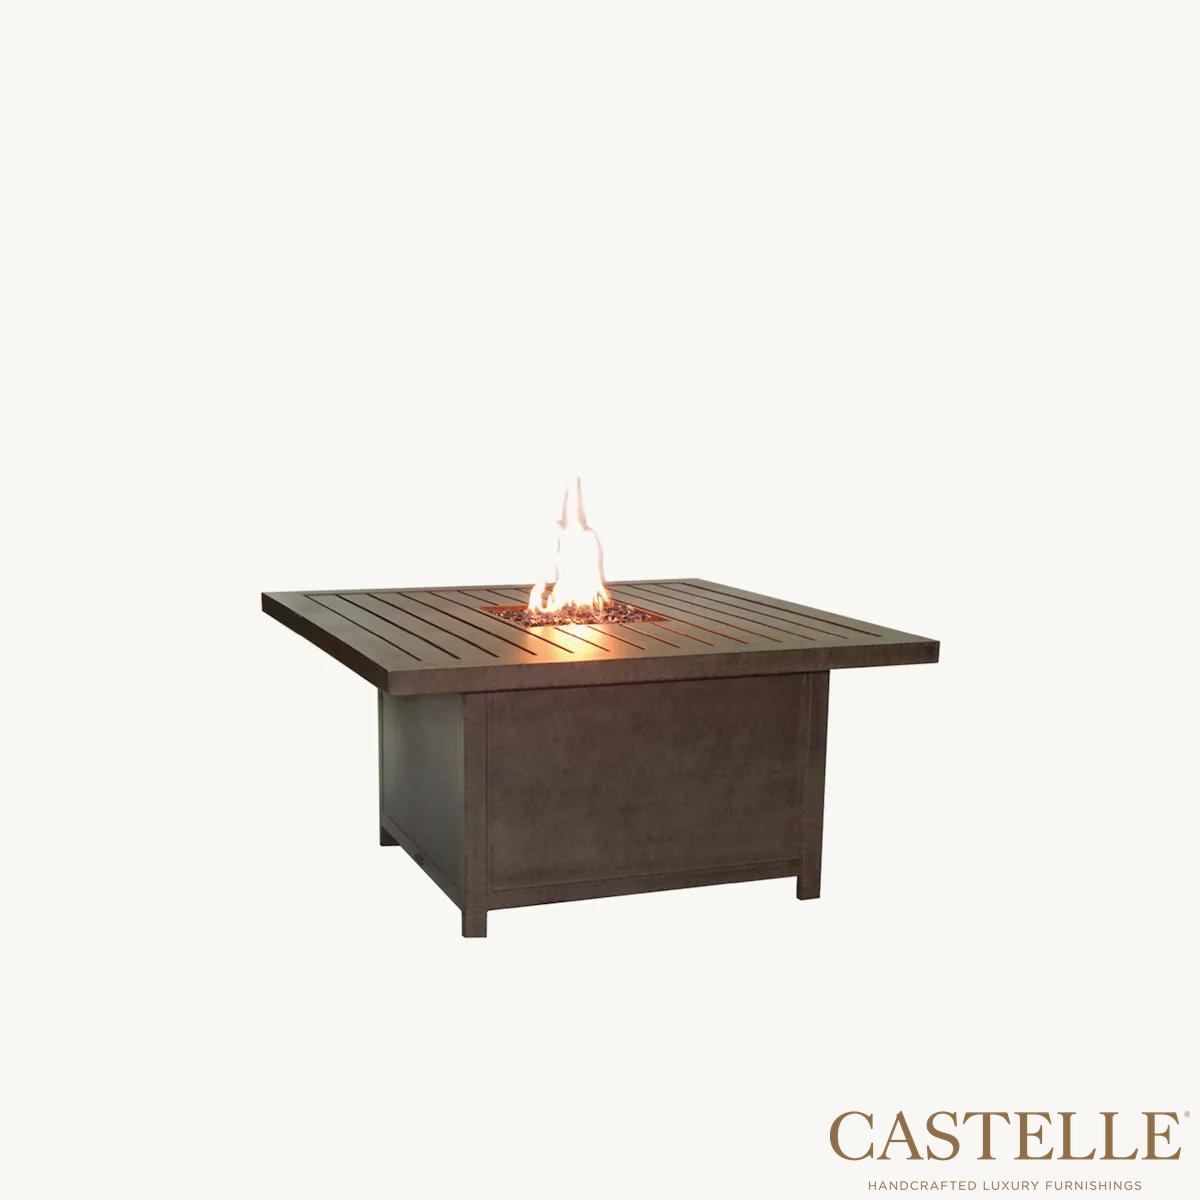 Moderna 36" X 52" Rectangular Coffee Table With Firepit